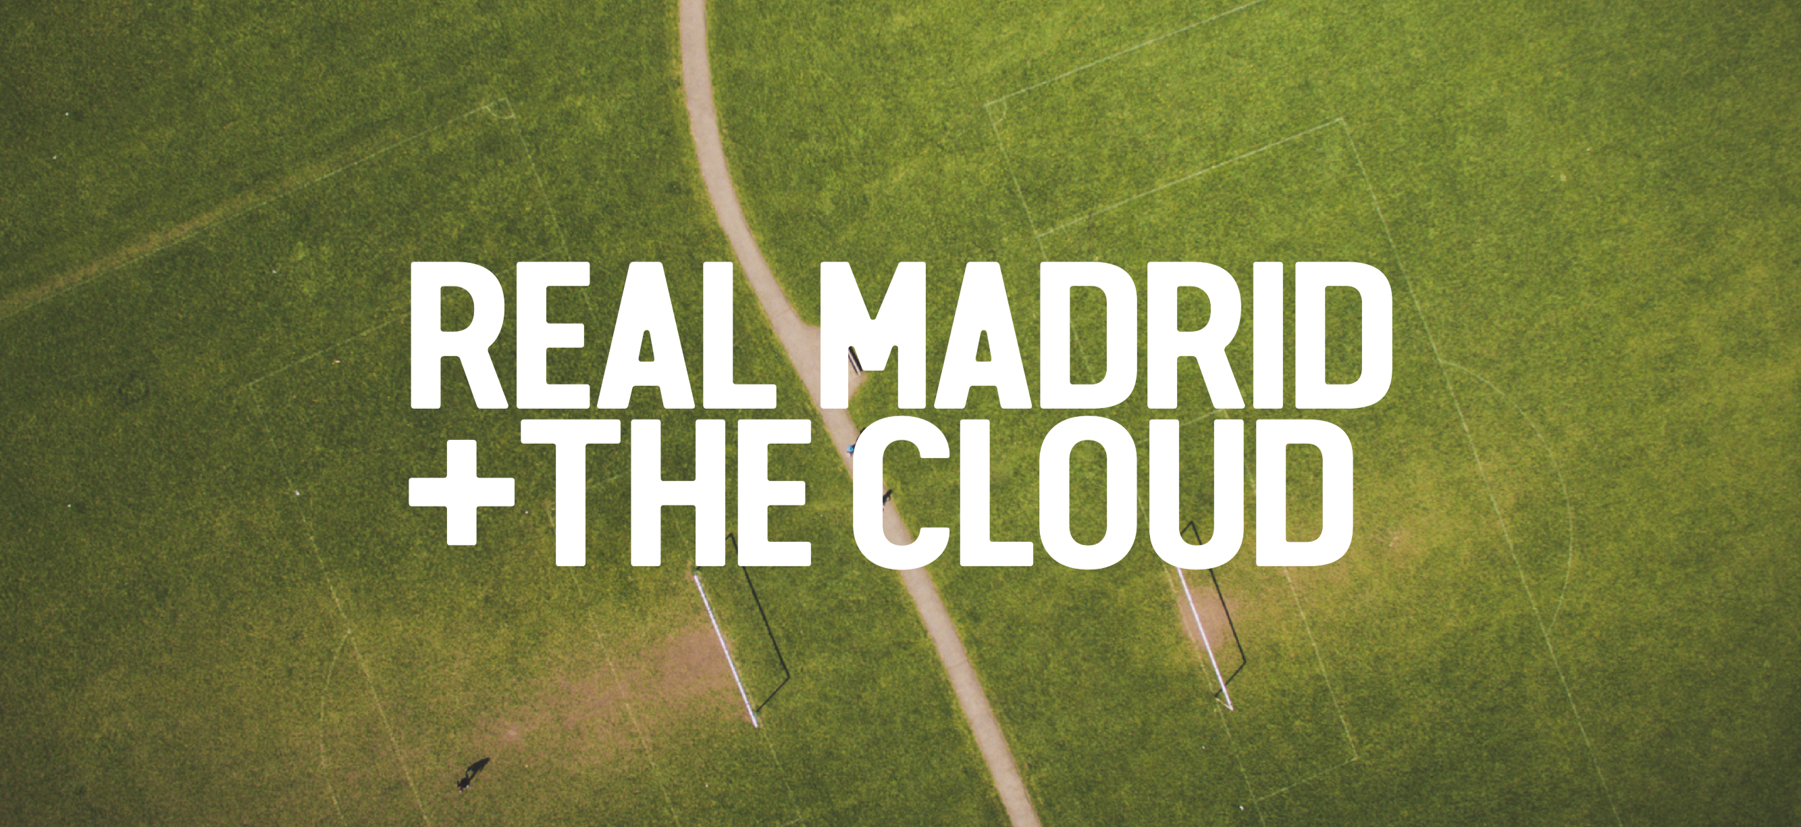 Real Madrid + the cloud